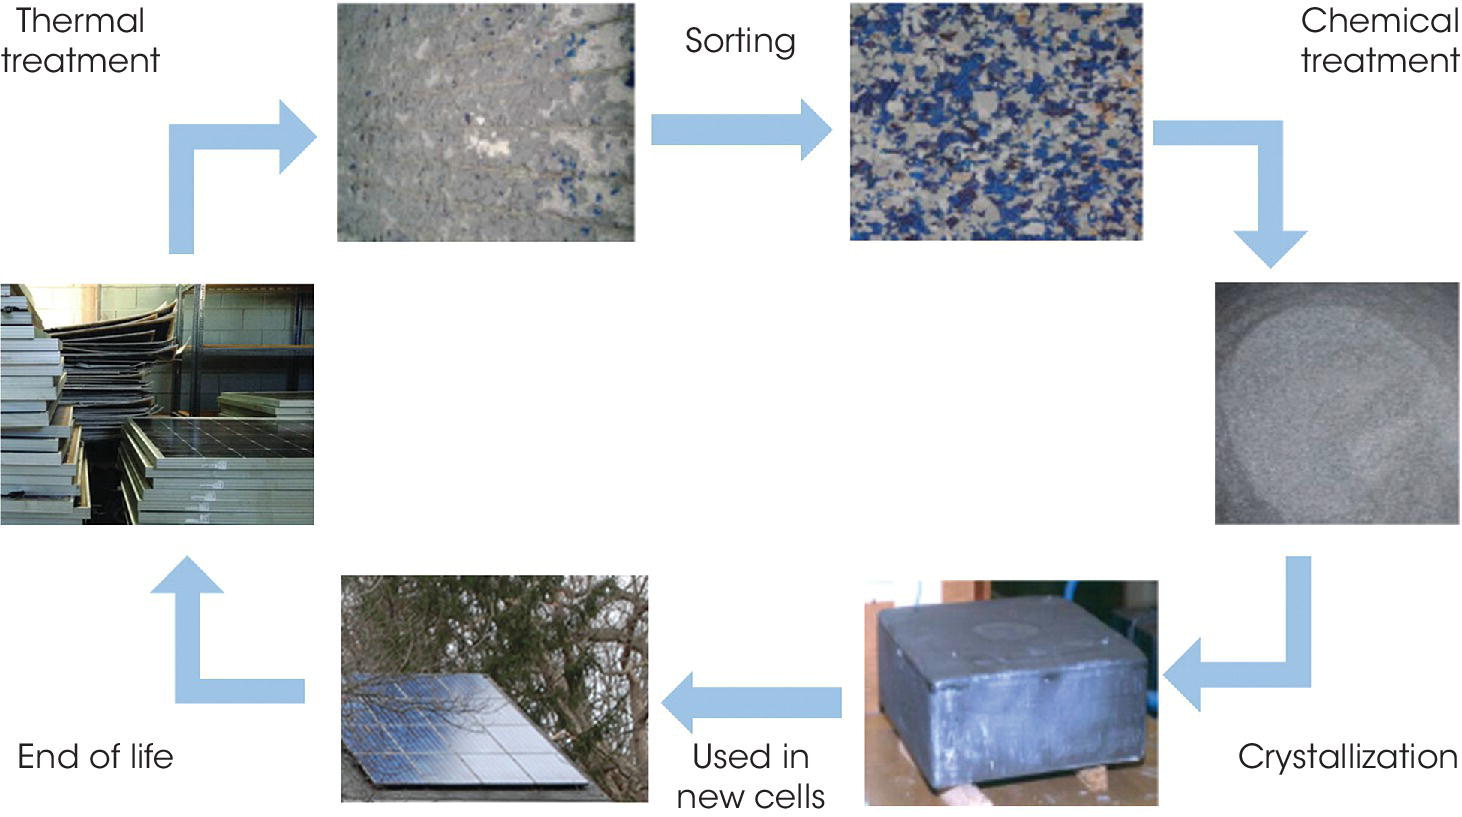 Schematic for recycling of crystalline silicon PV modules with photos connected by clockwise arrows labeled thermal treatment, sorting, chemical treatment, crystallization, used in new cells, and end of life.